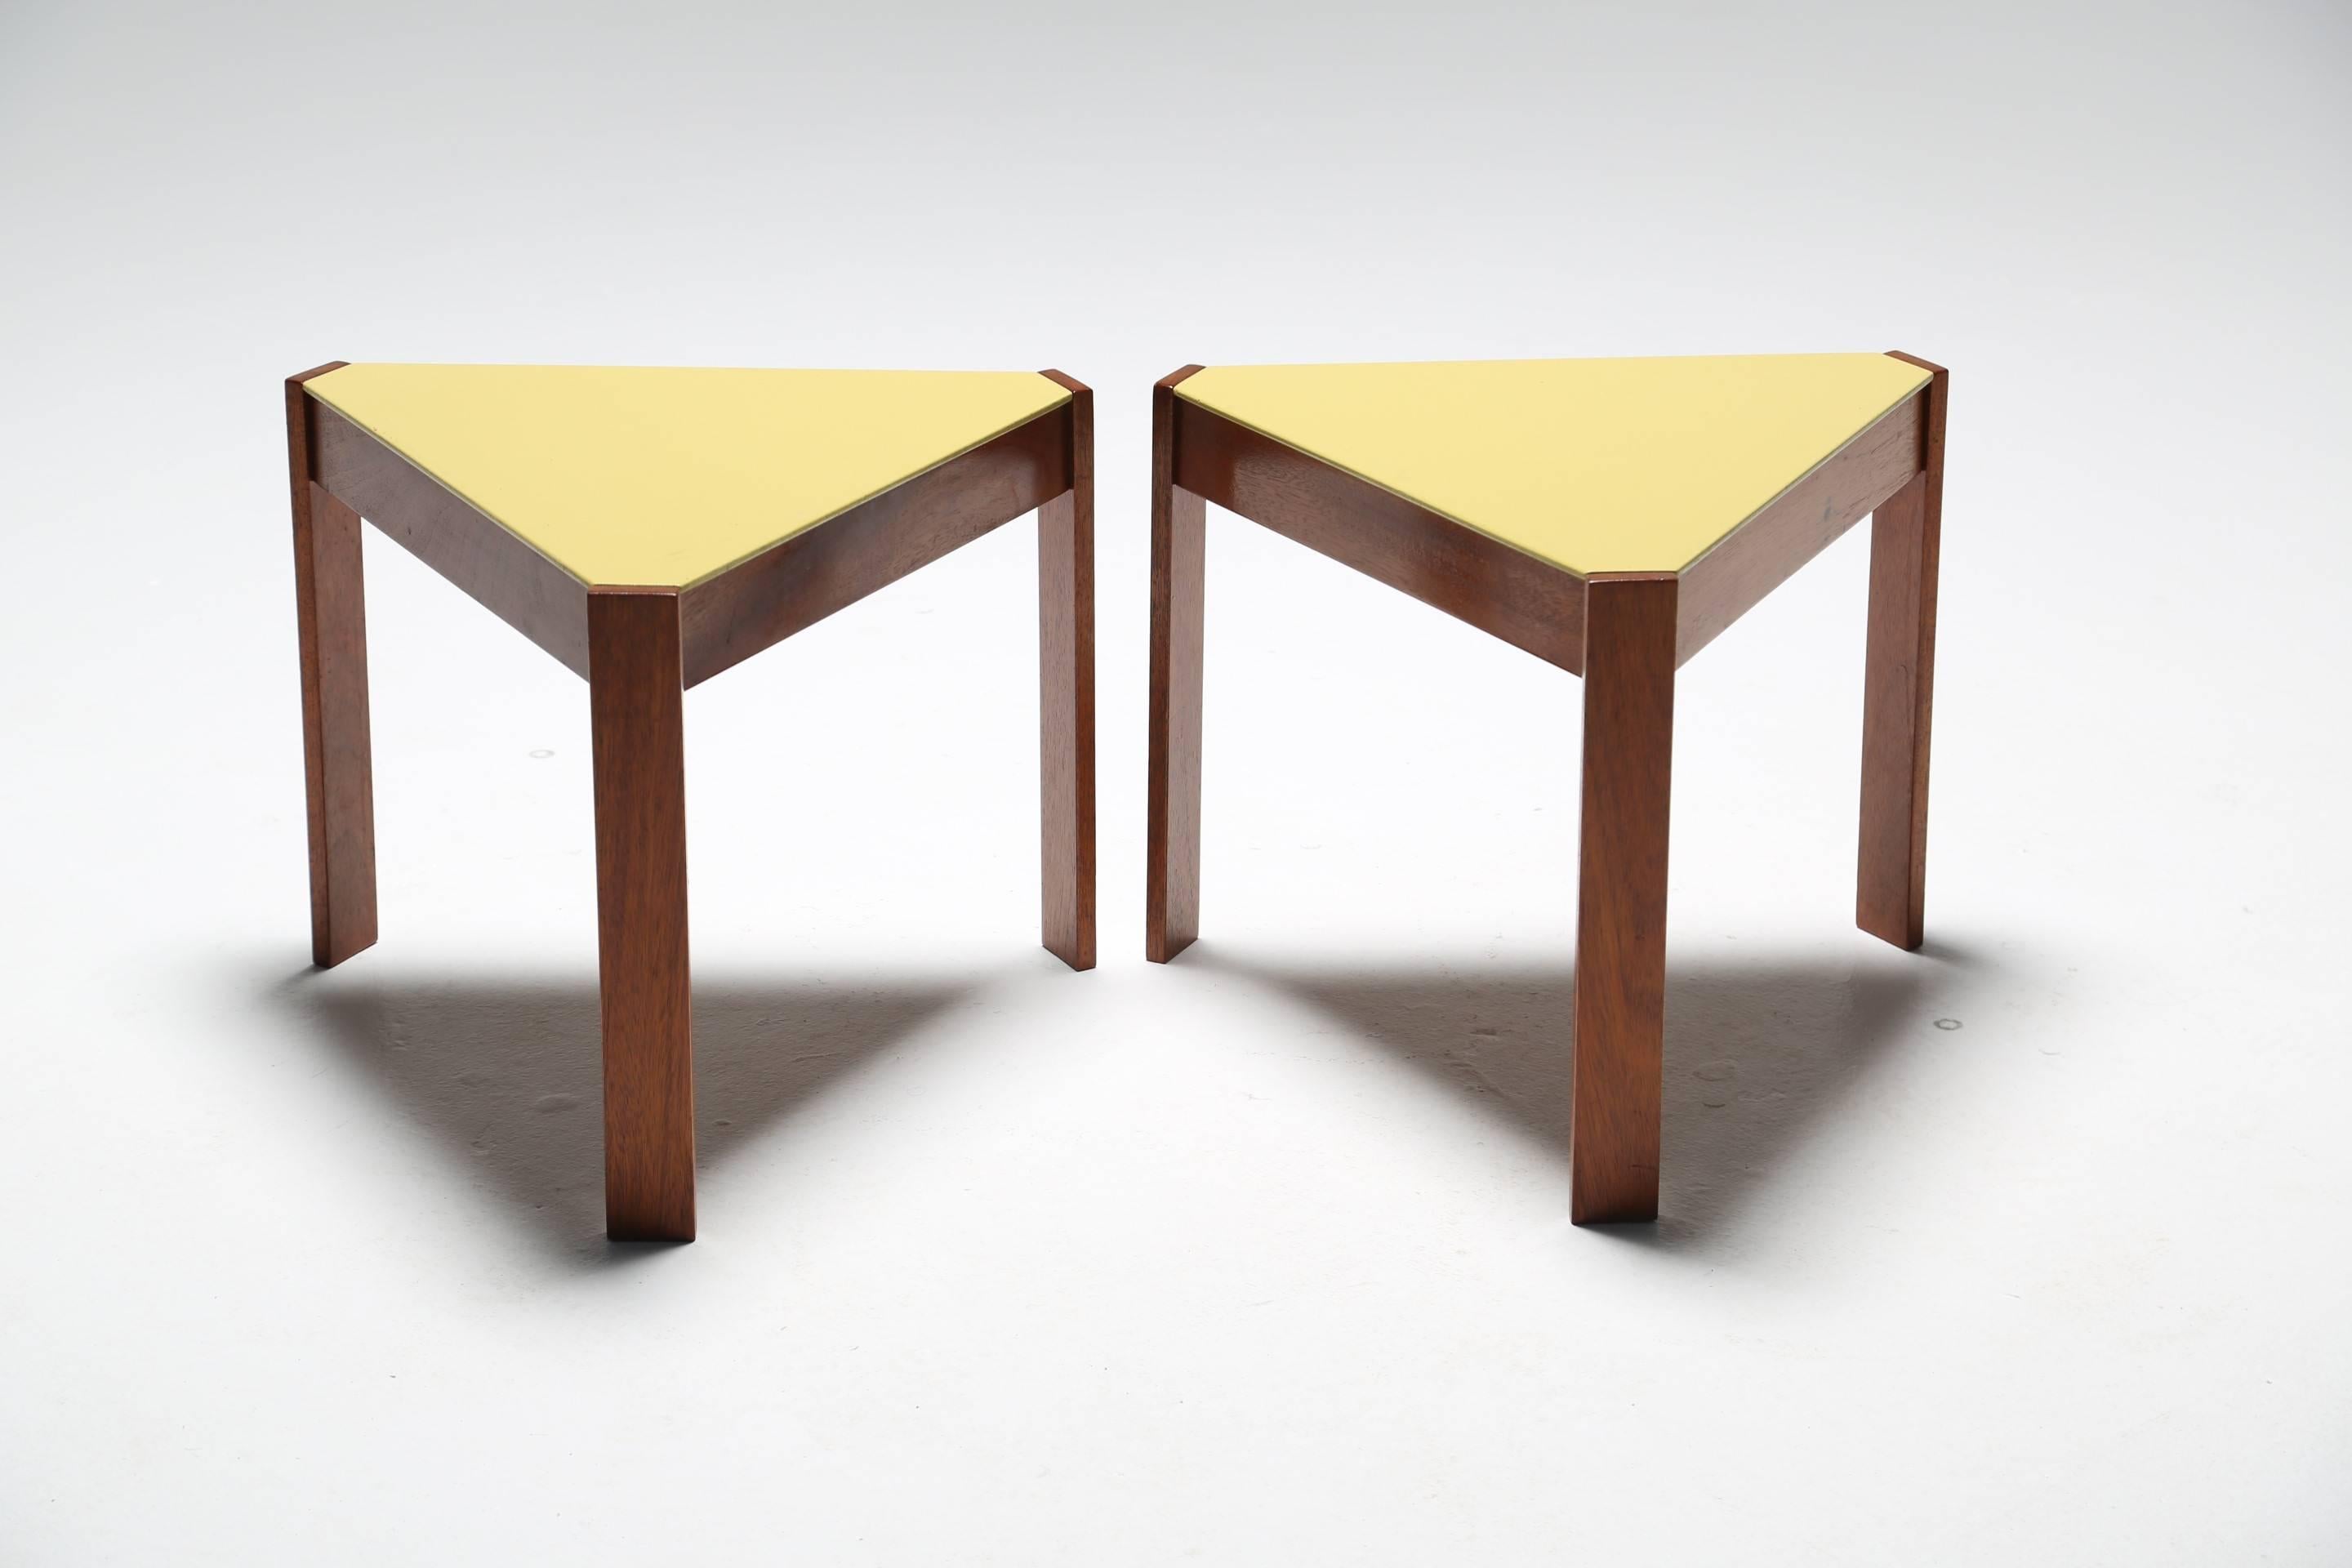 We love the geometric quality to this pair of unusual and rare vintage teak side tables with painted yellow tops. They have a fun and quirky appeal that could brighten up any interior and we think that they would look just as good in a living room